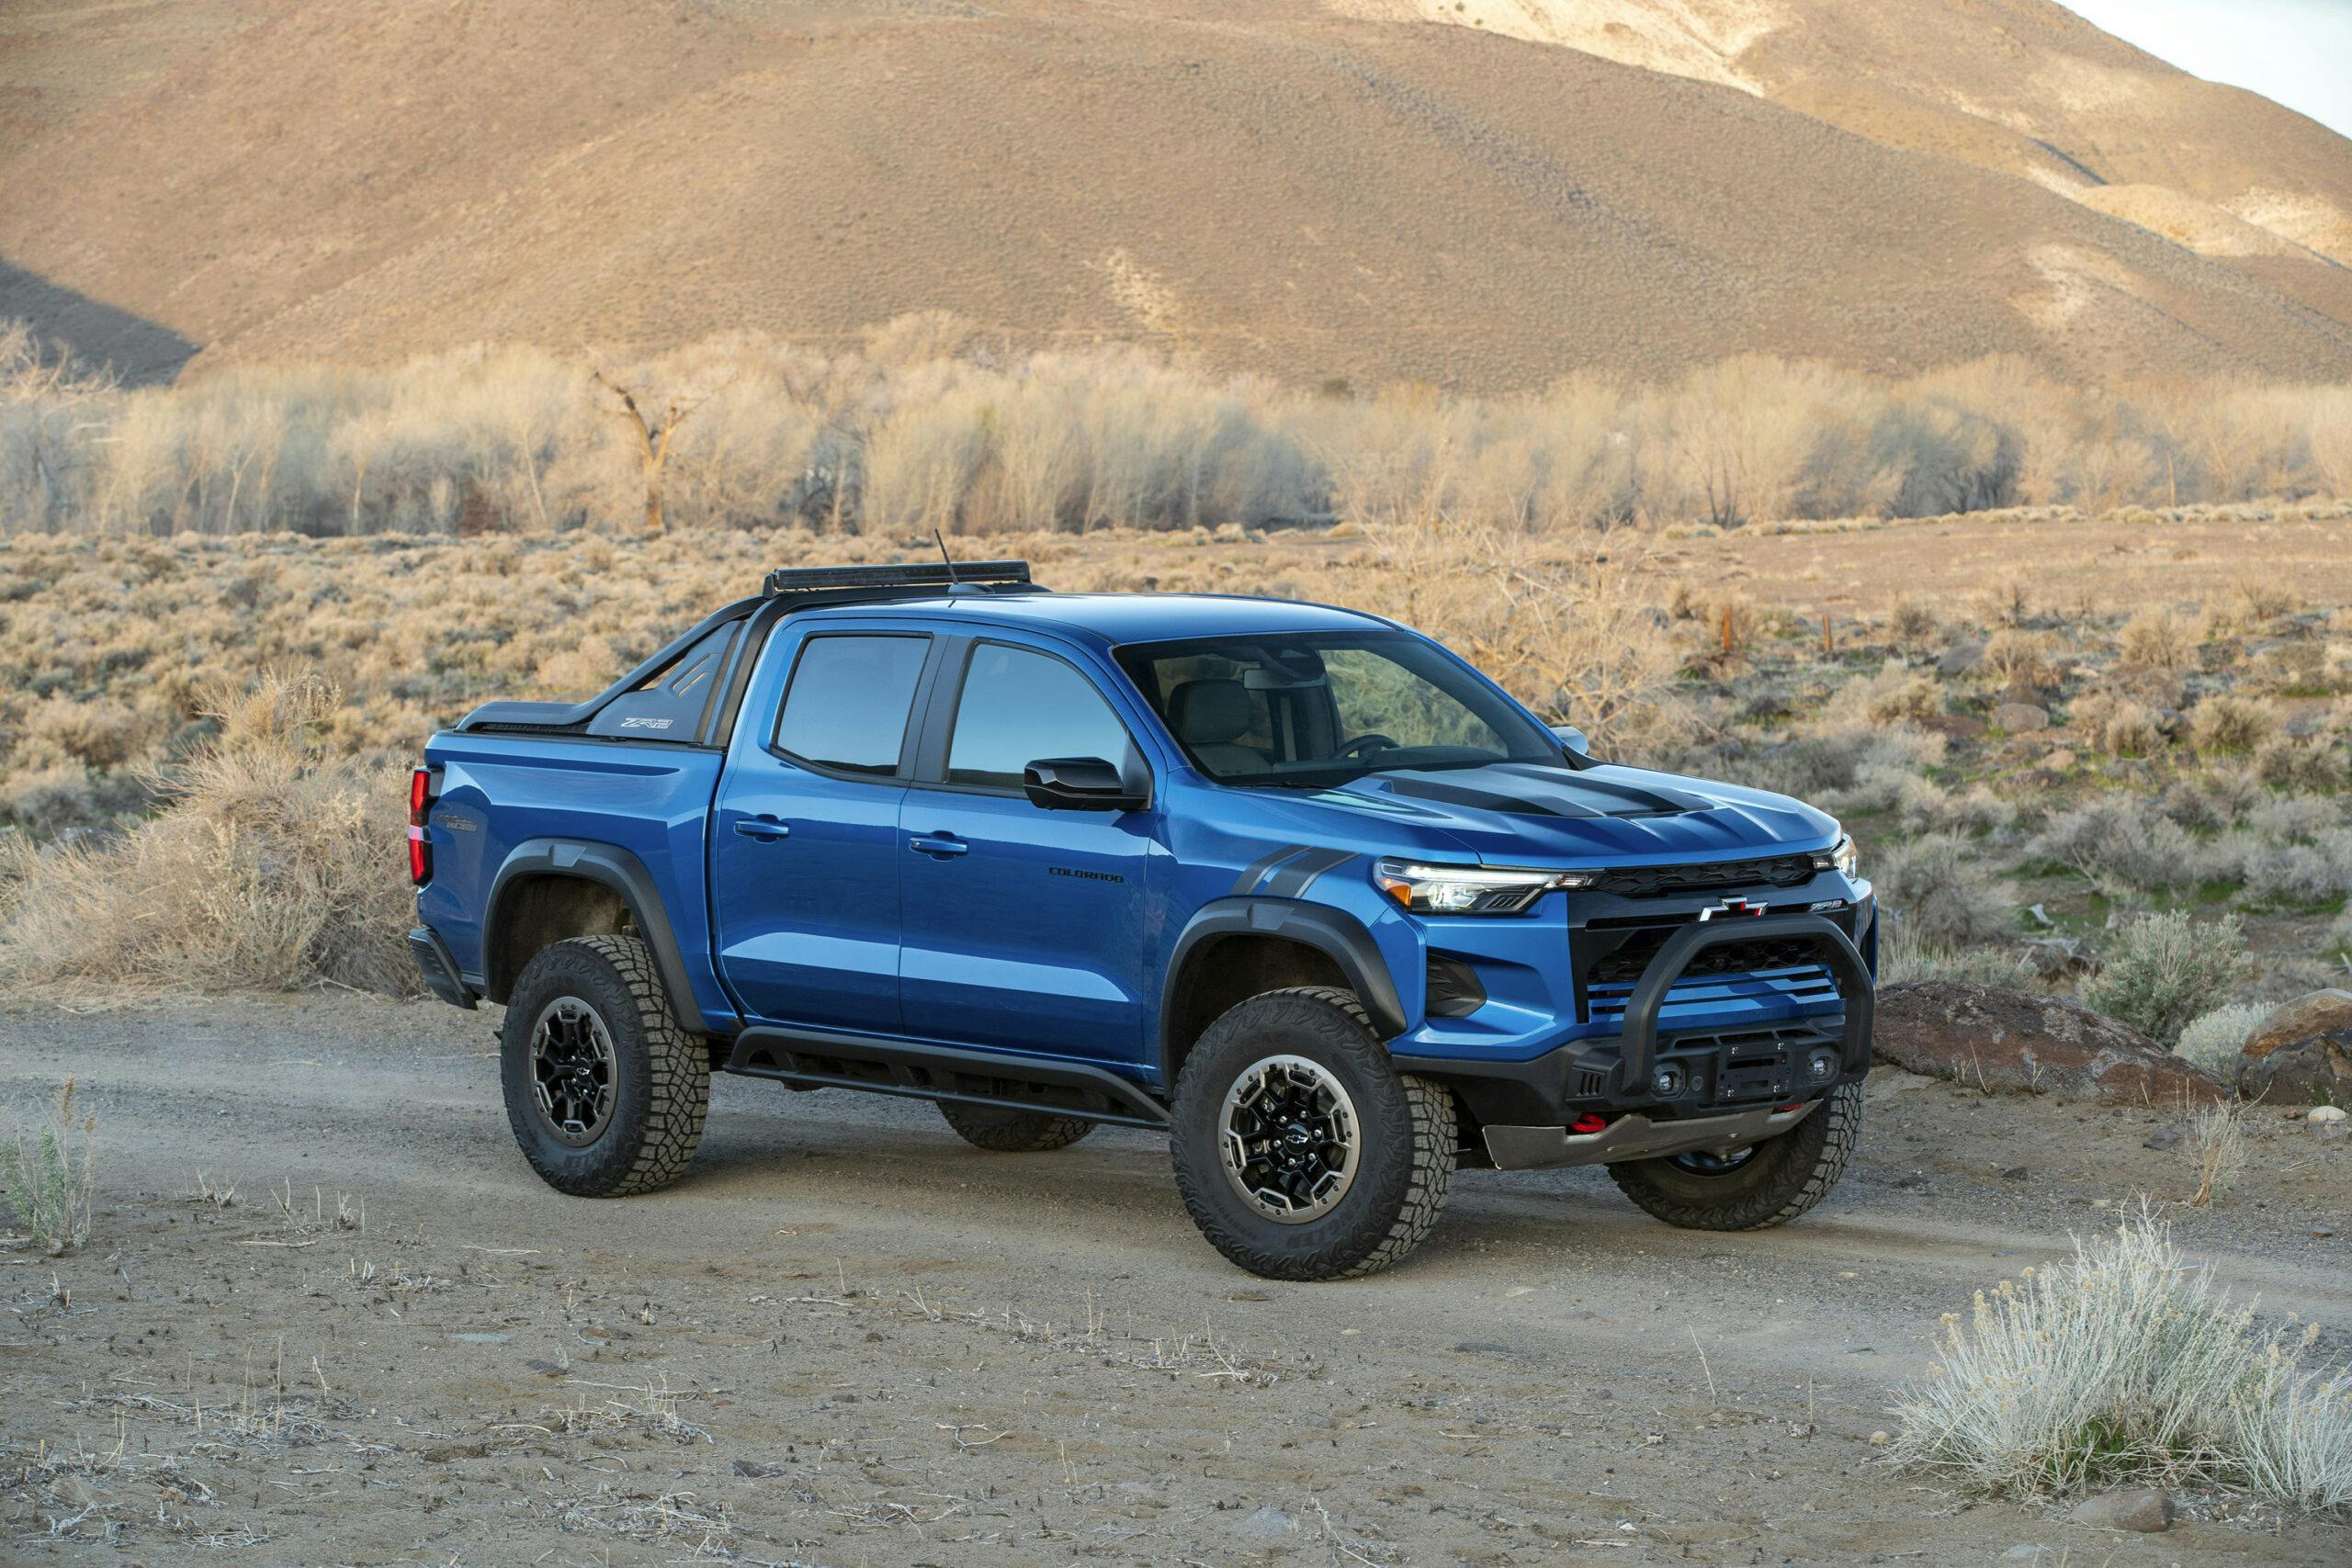 The Top 10 Off-Road Vehicles for Conquering Any Terrain - Chevrolet Colorado ZR2 Specs and Features